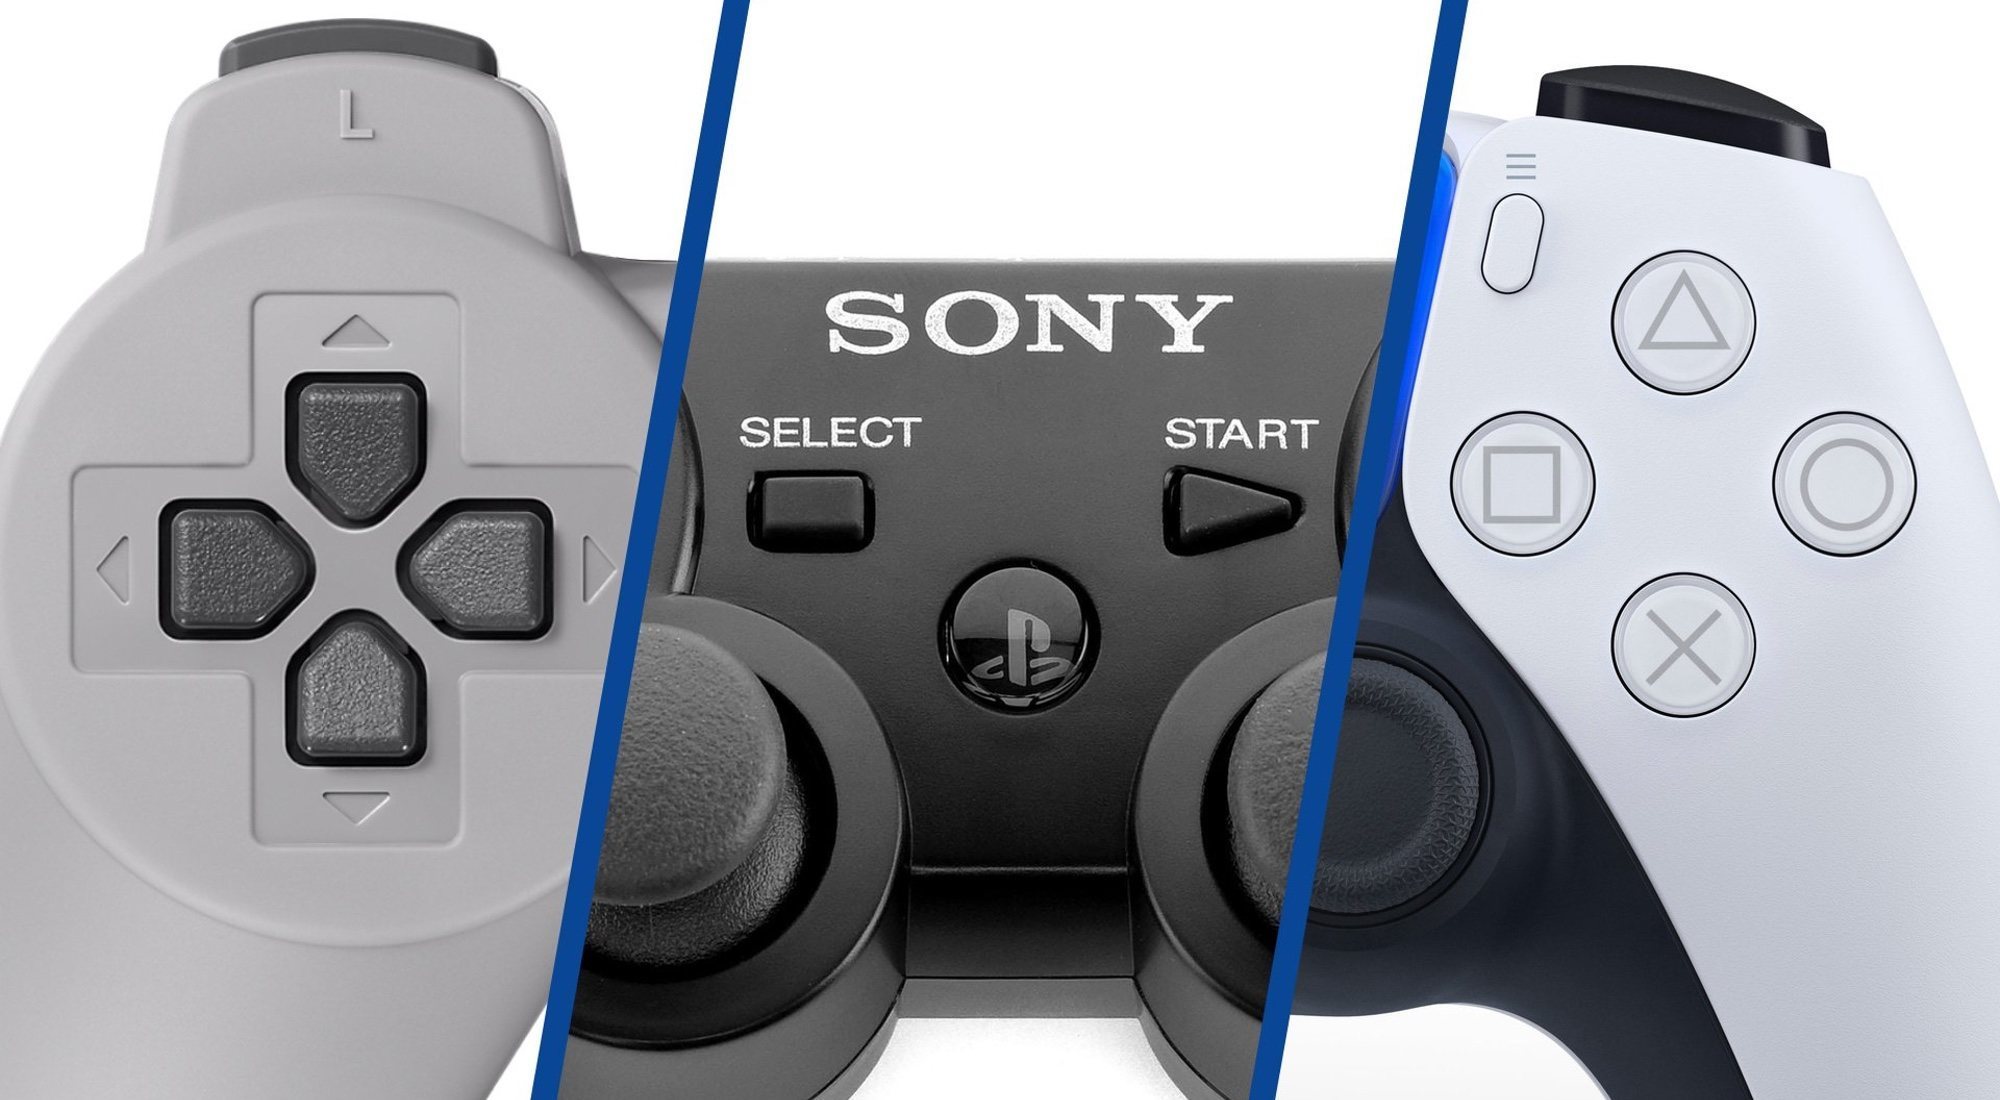 Ps2 ps4. Ps5 Dualsense Controller стики. Геймпад Sony PLAYSTATION 5 Dualsense. Ps1 ps2 ps3 ps4 Gamepad. Sony ps1 джойстик.